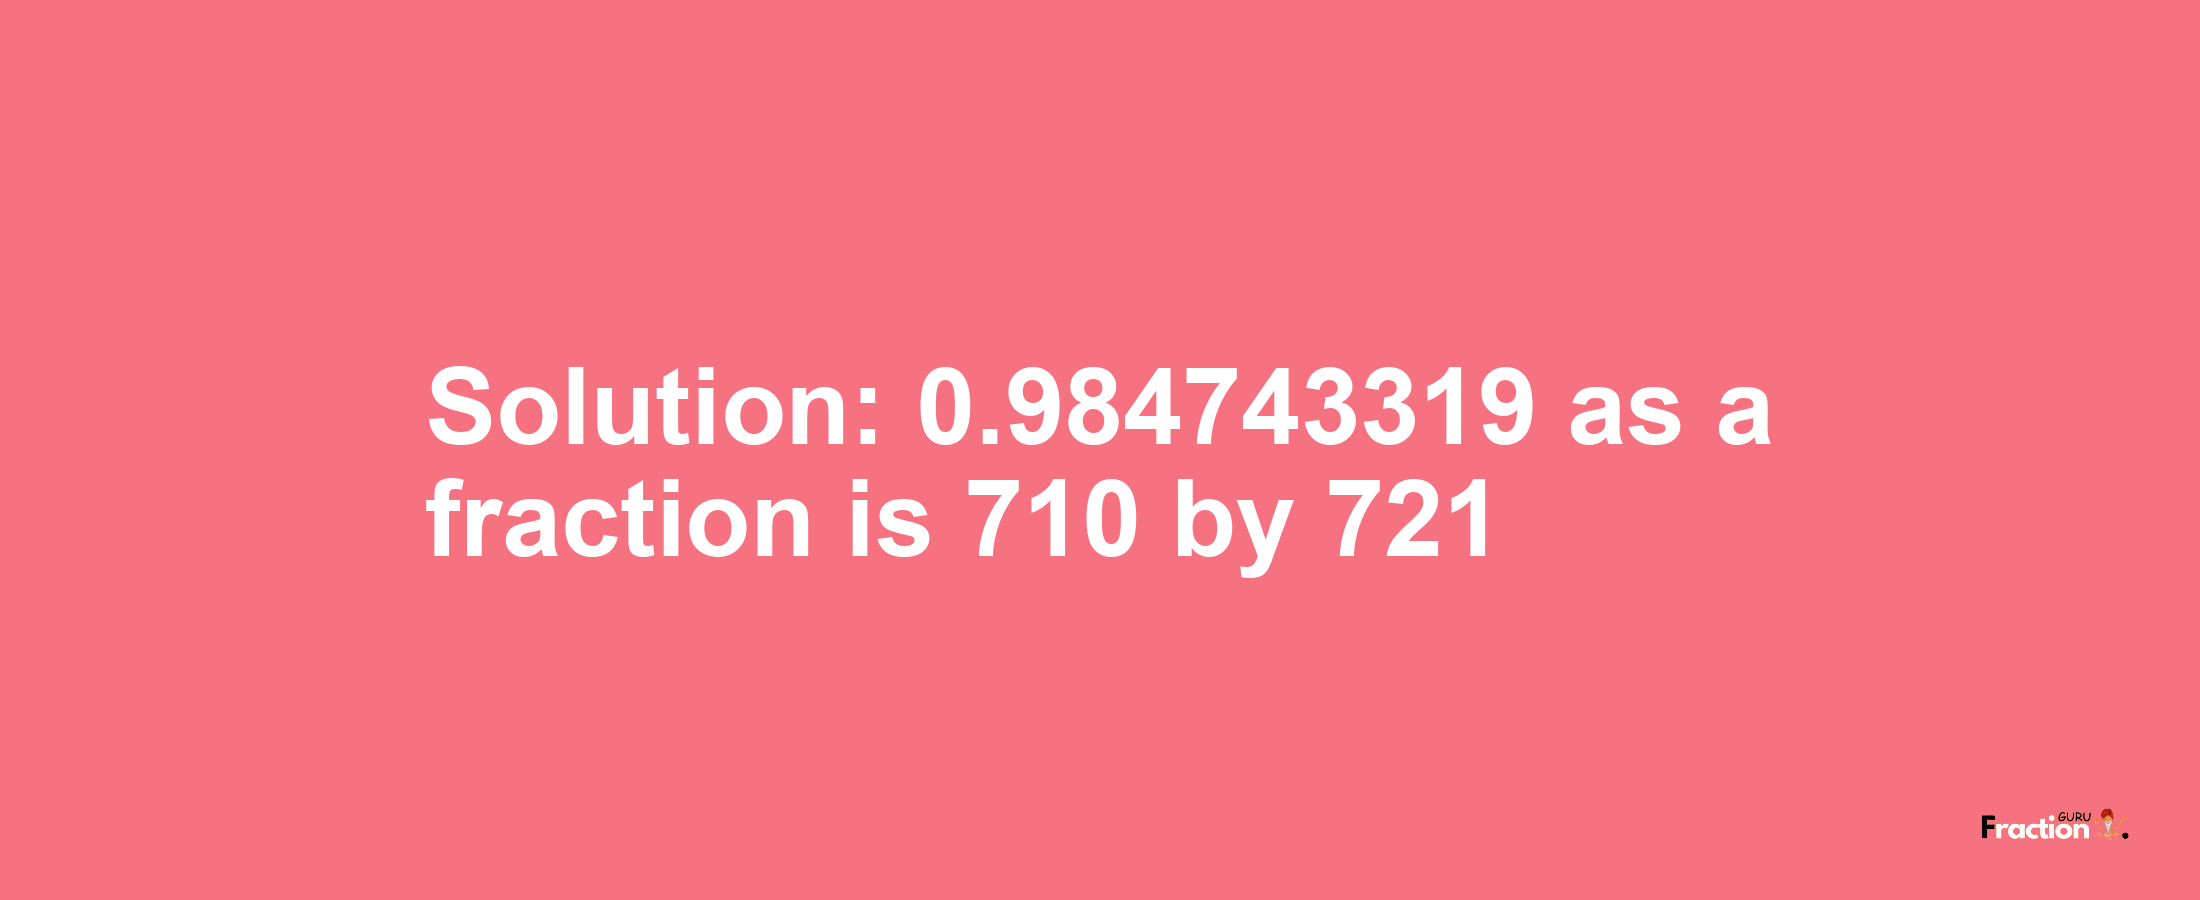 Solution:0.984743319 as a fraction is 710/721